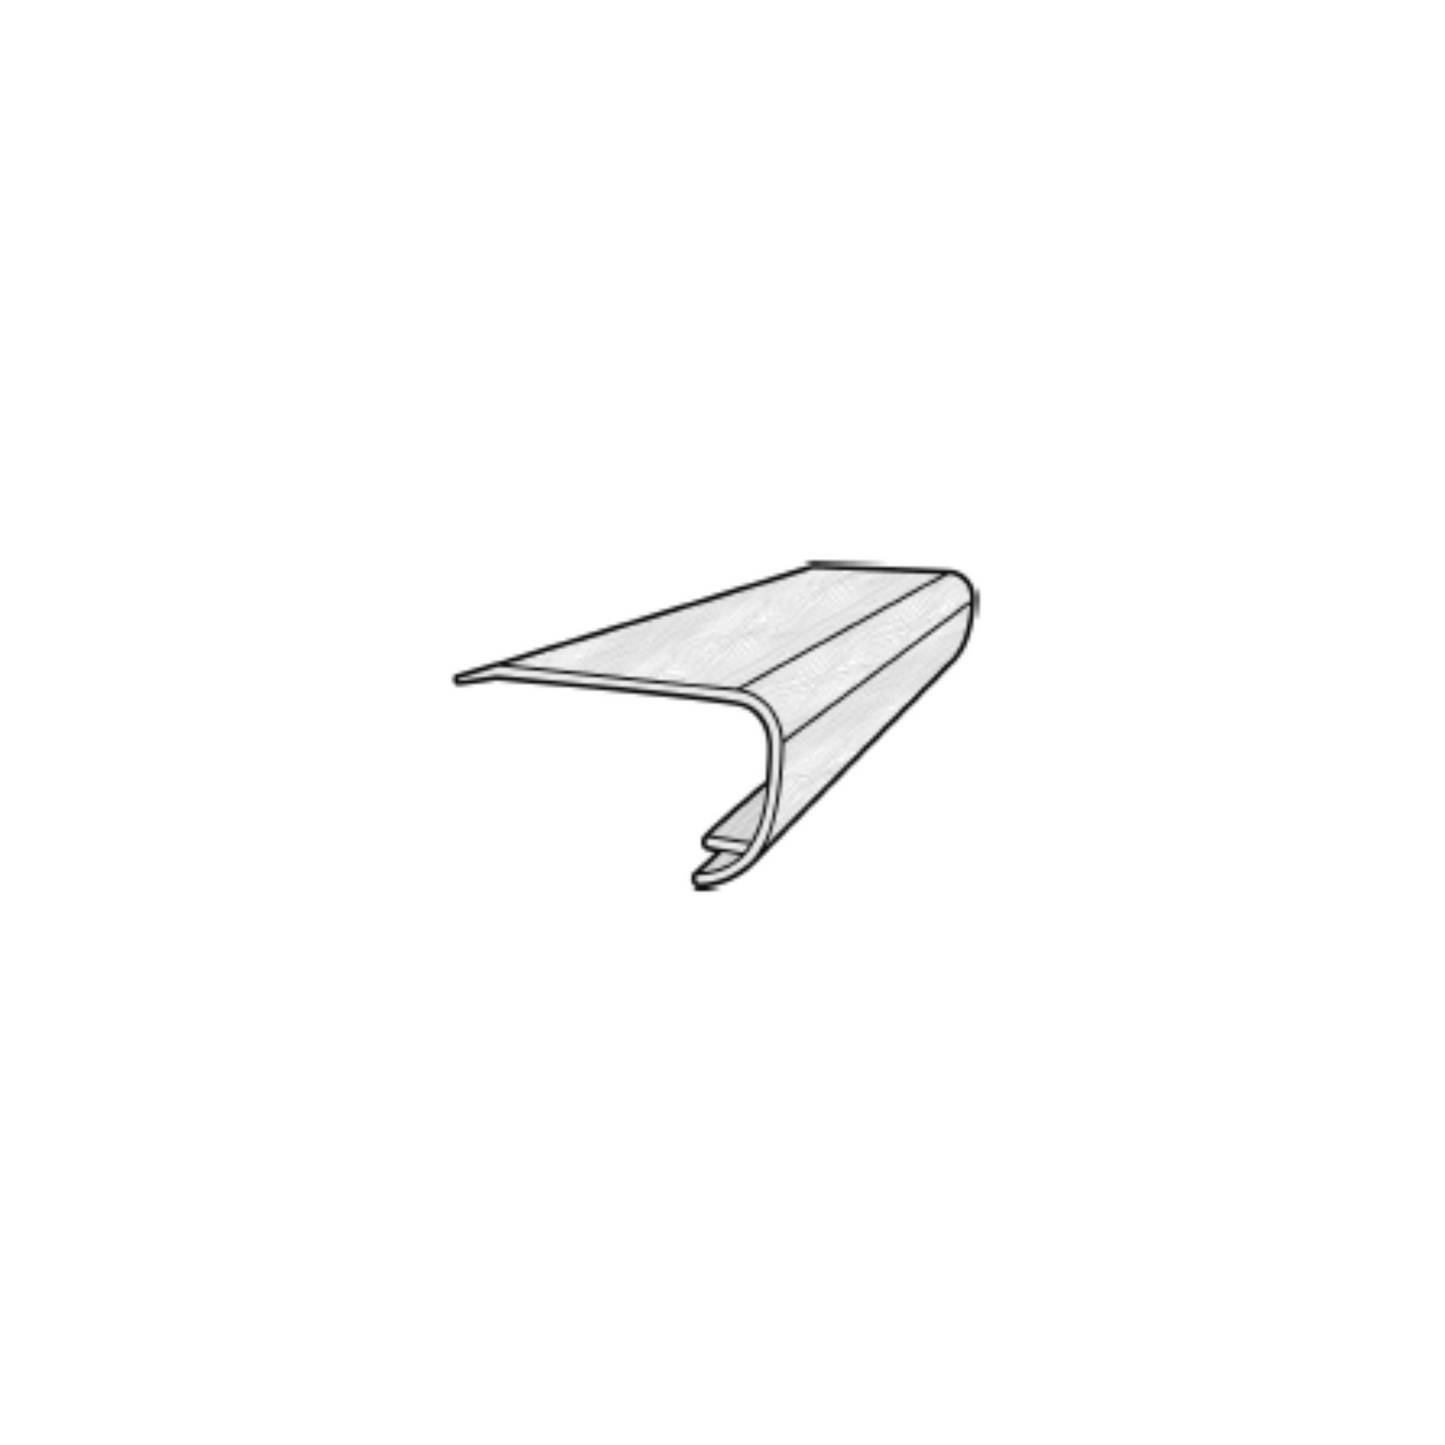 Accessory Shaw - Endura Plus - Silver Dollar - Overlap Stair Nose Shaw